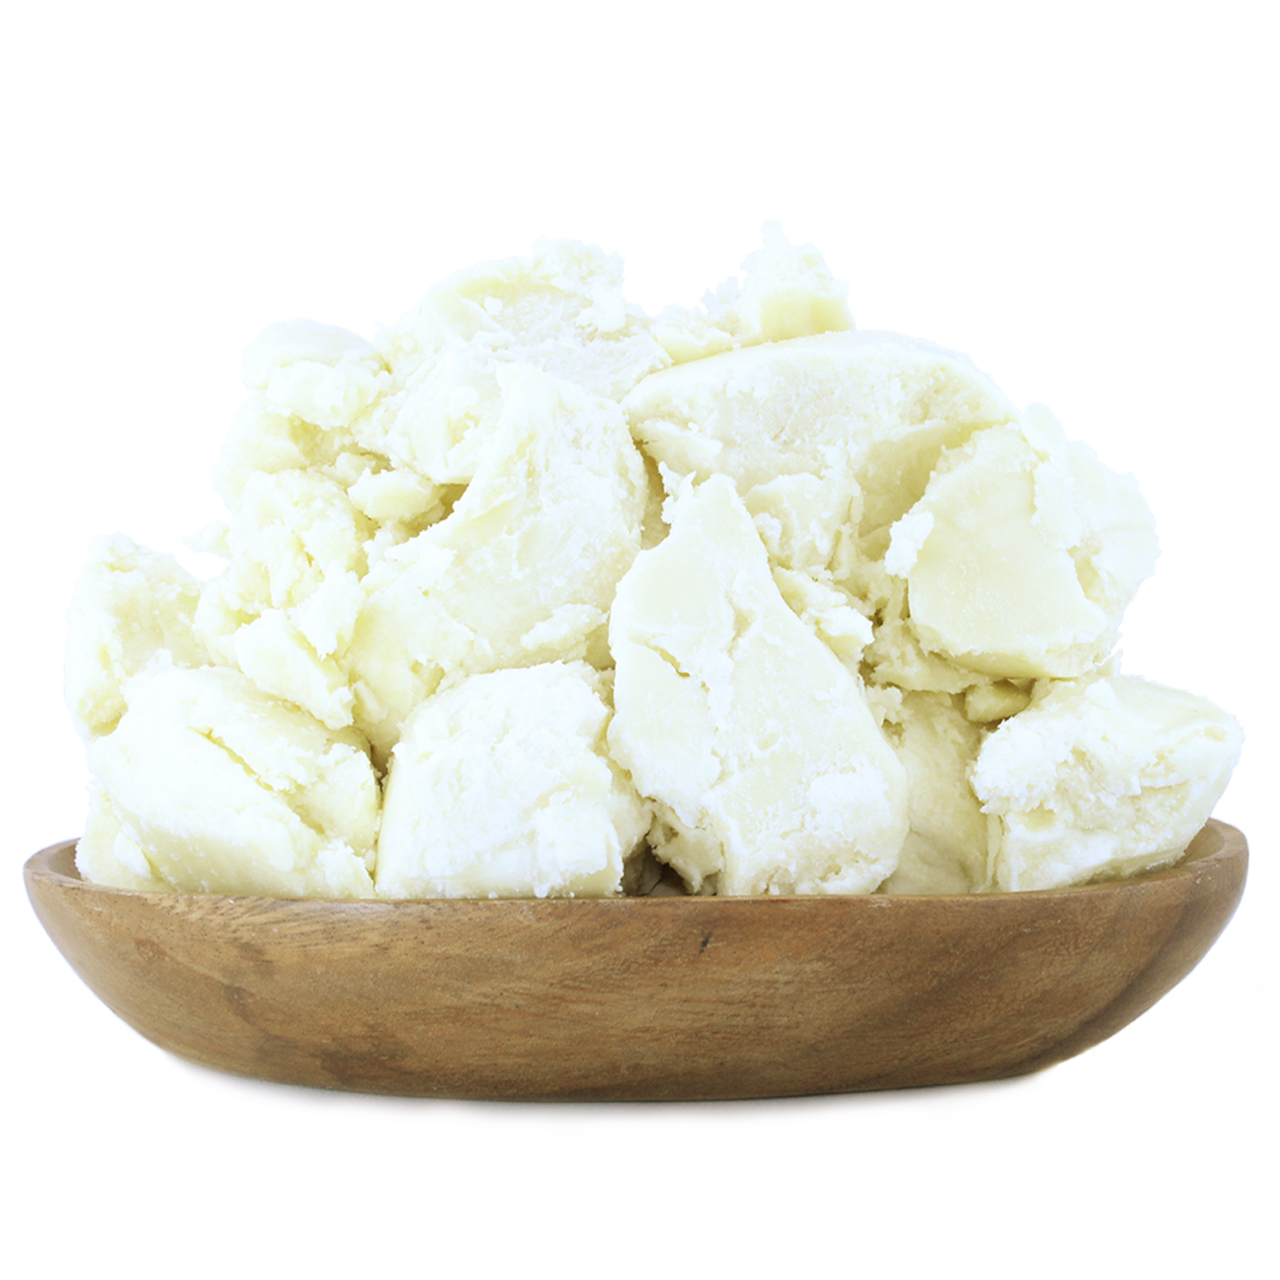 9 Ways To Profit From The Shea Butter Value Chain in Nigeria